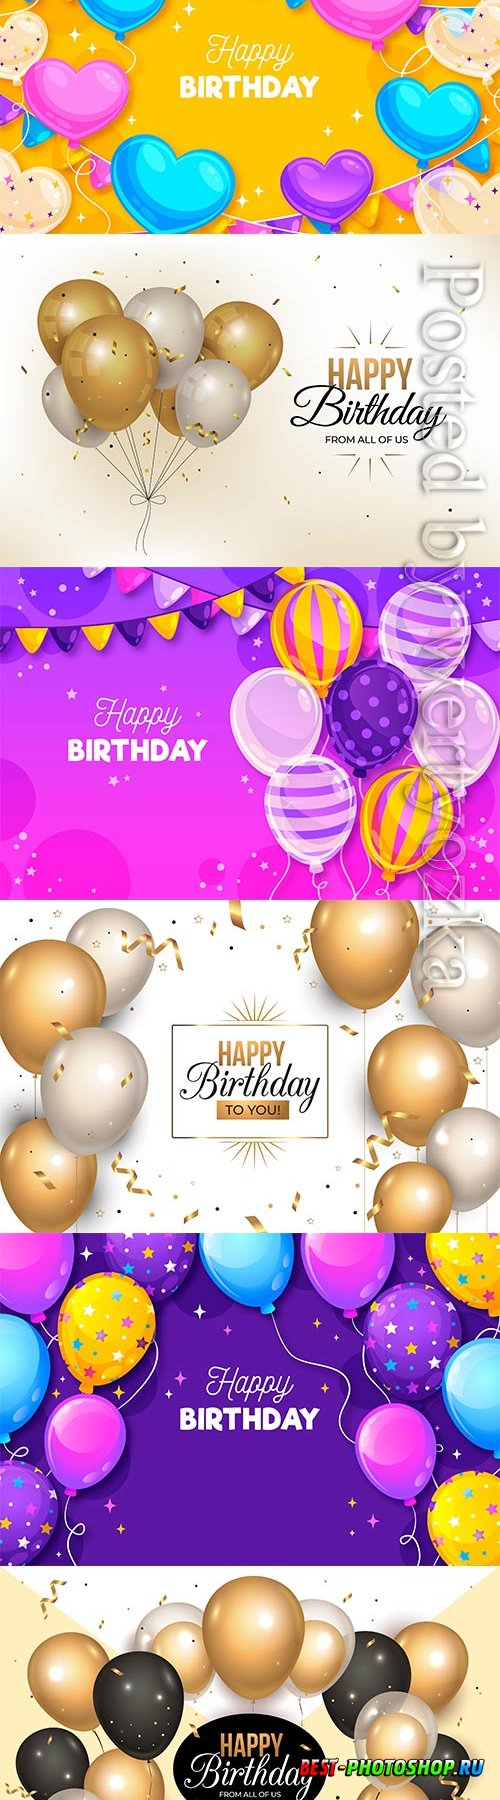 Happy birthday background with balloons